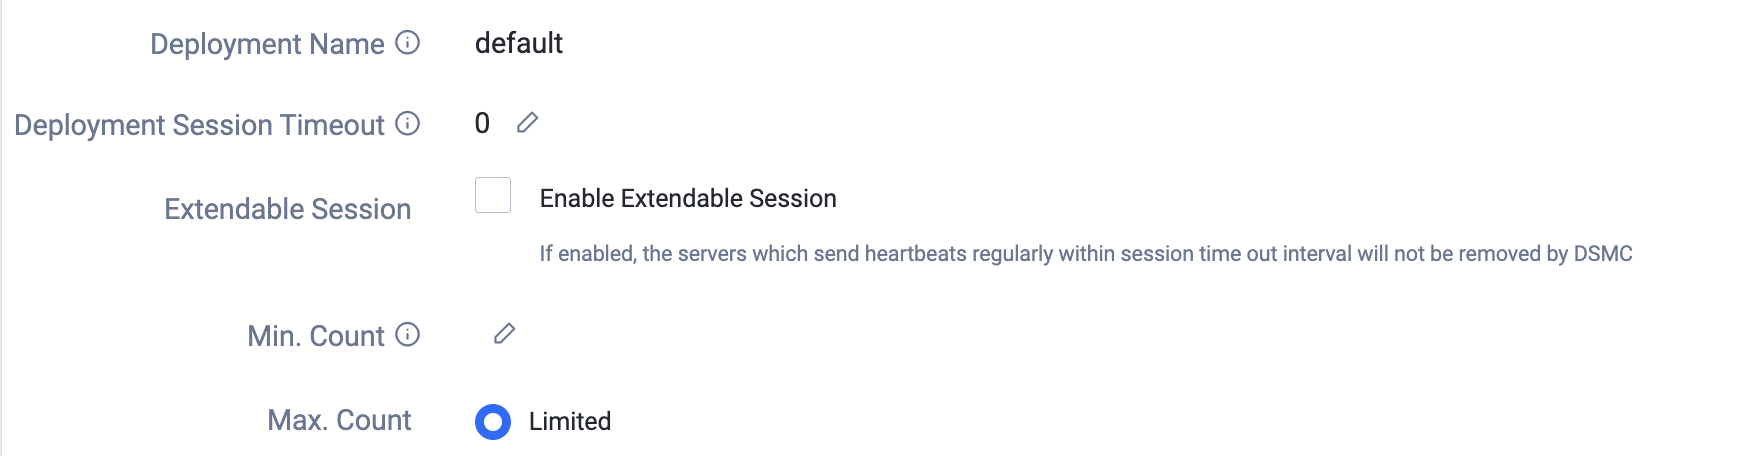 enable extendable session